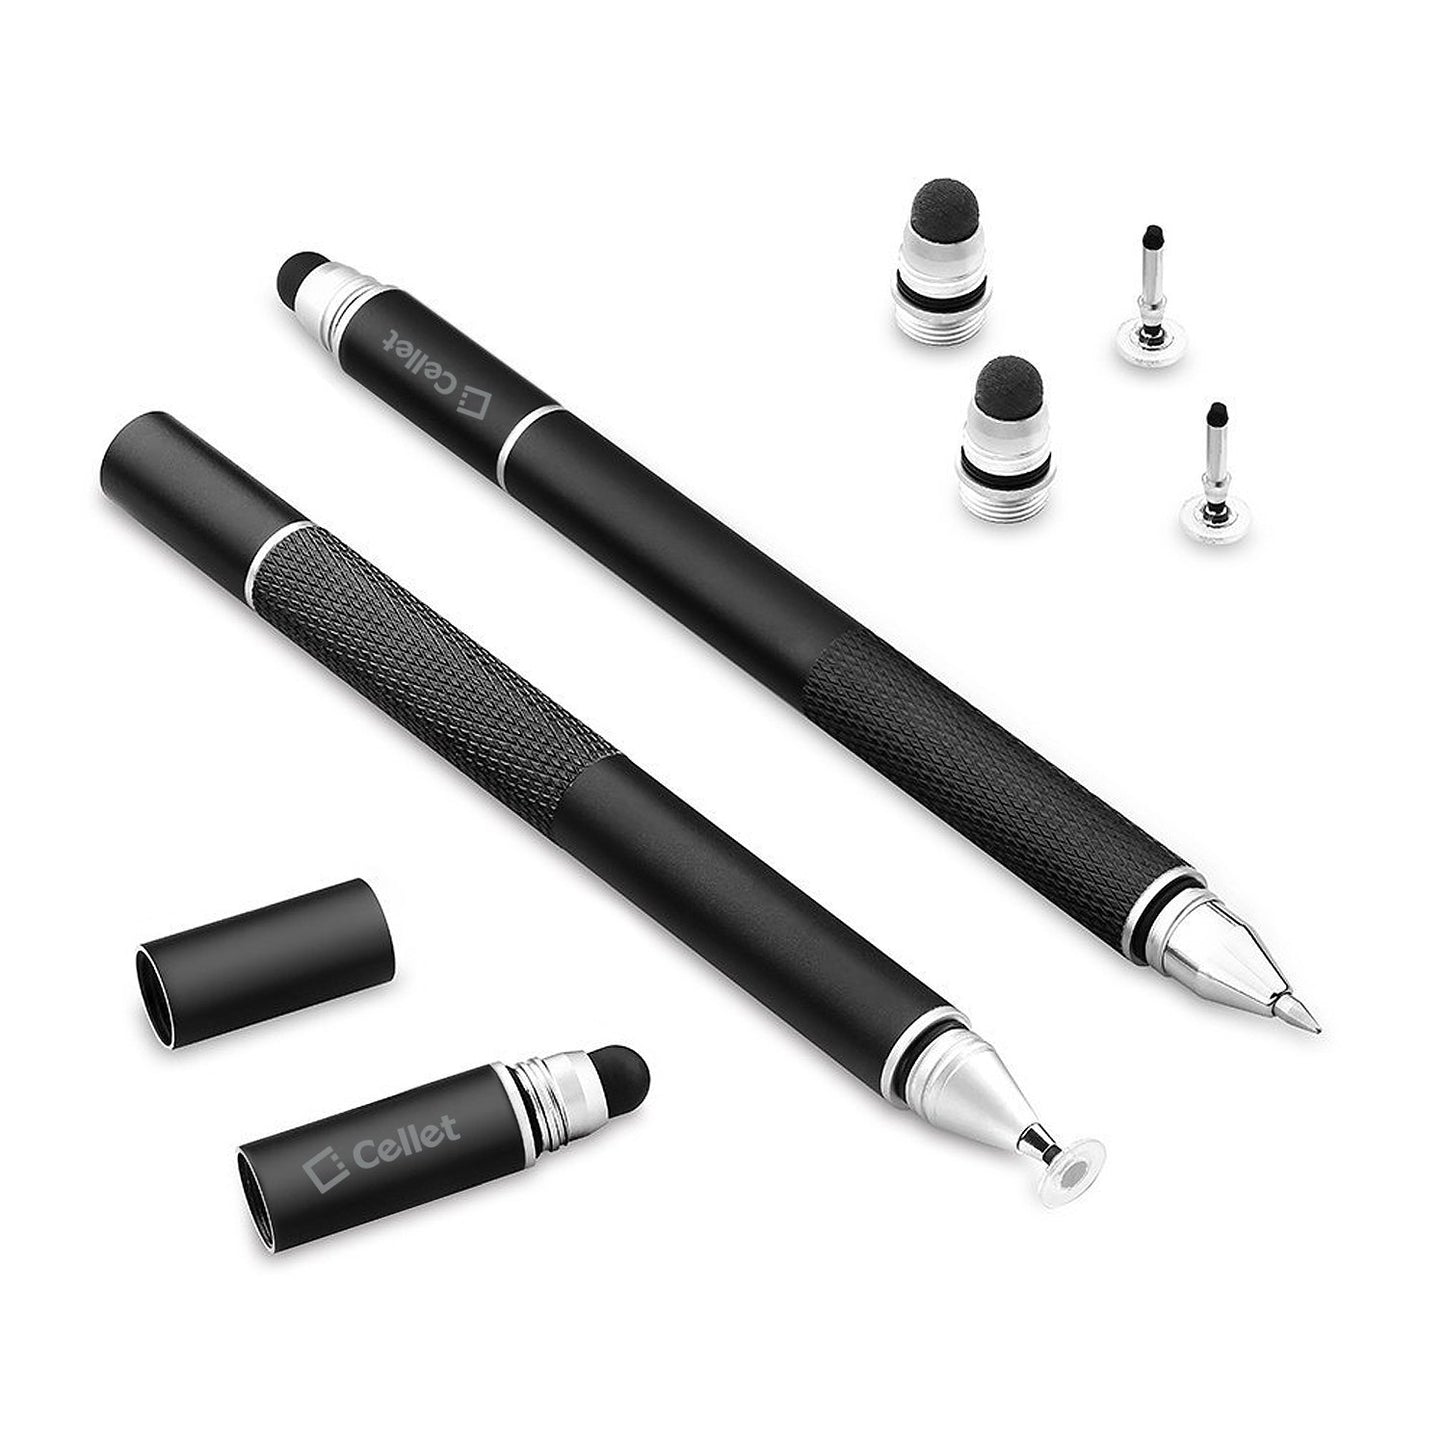 PENDISCBK - 3 in 1 Stylus Pen (Ballpoint Pen, Precision Clear Disc Pen, Capacitive Stylus Pen), 2 Stylus Pens with Replacement Tips - Black